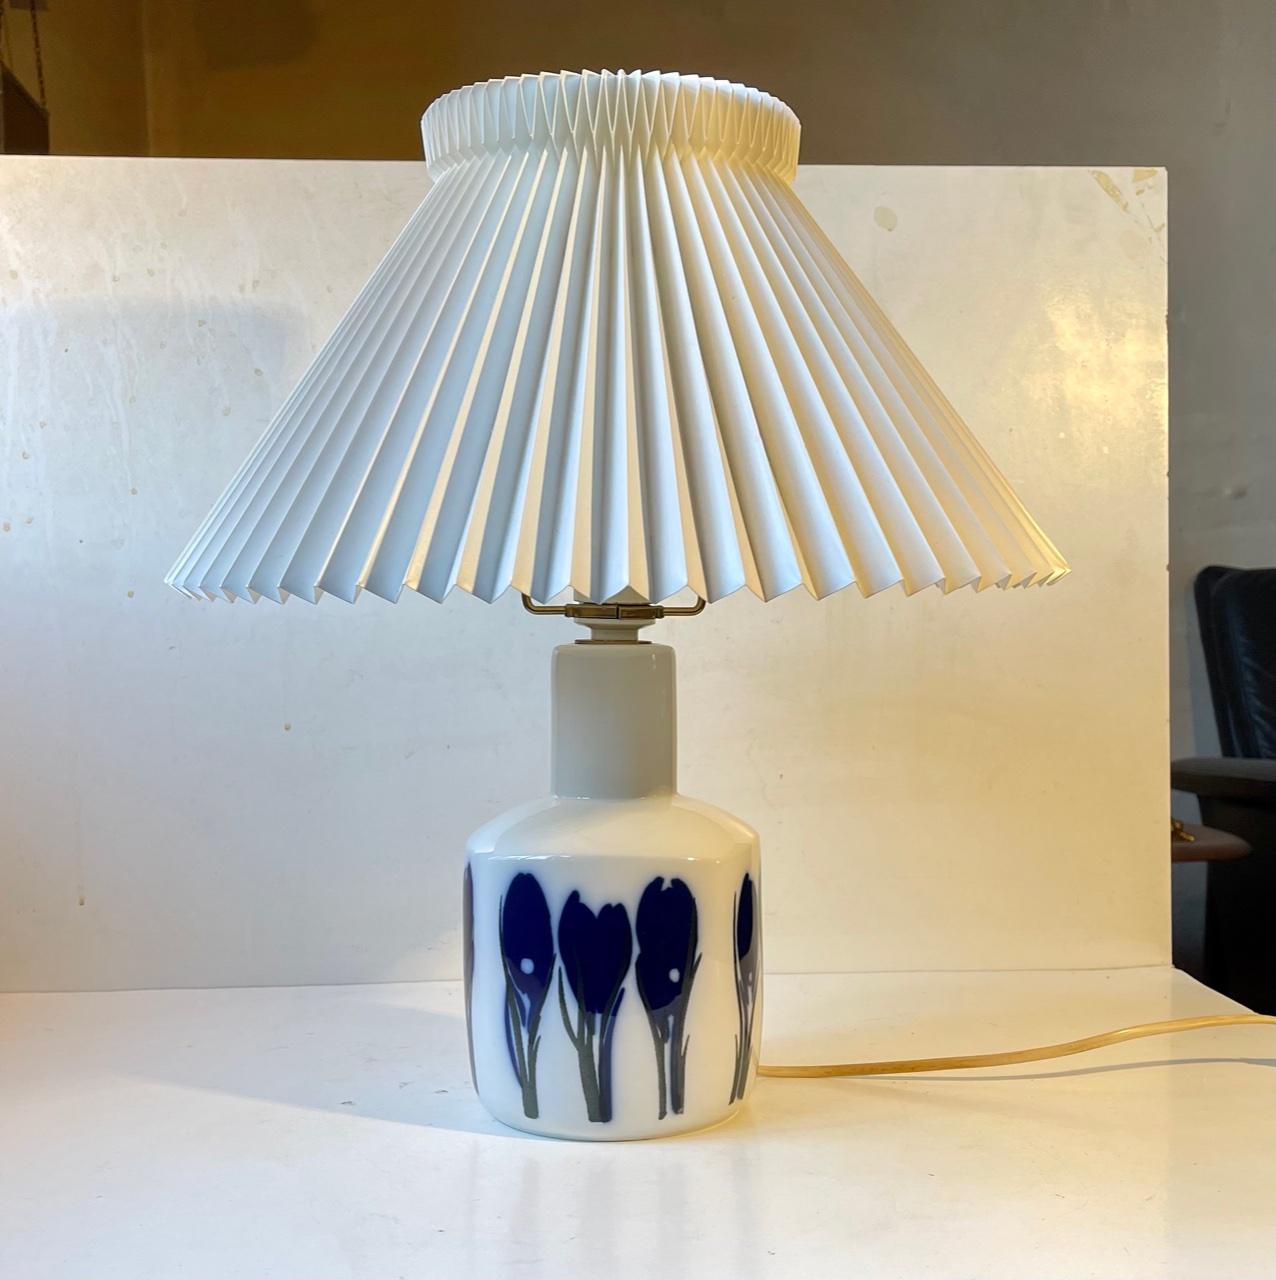 White glazed porcelain table light with an modenist depictions of tulips in blue and black glazes. Designed in-house at Bing & Grondahl in Denmark during the 1960s. This one dates from the 70s. The shade is a model shade and is not included.